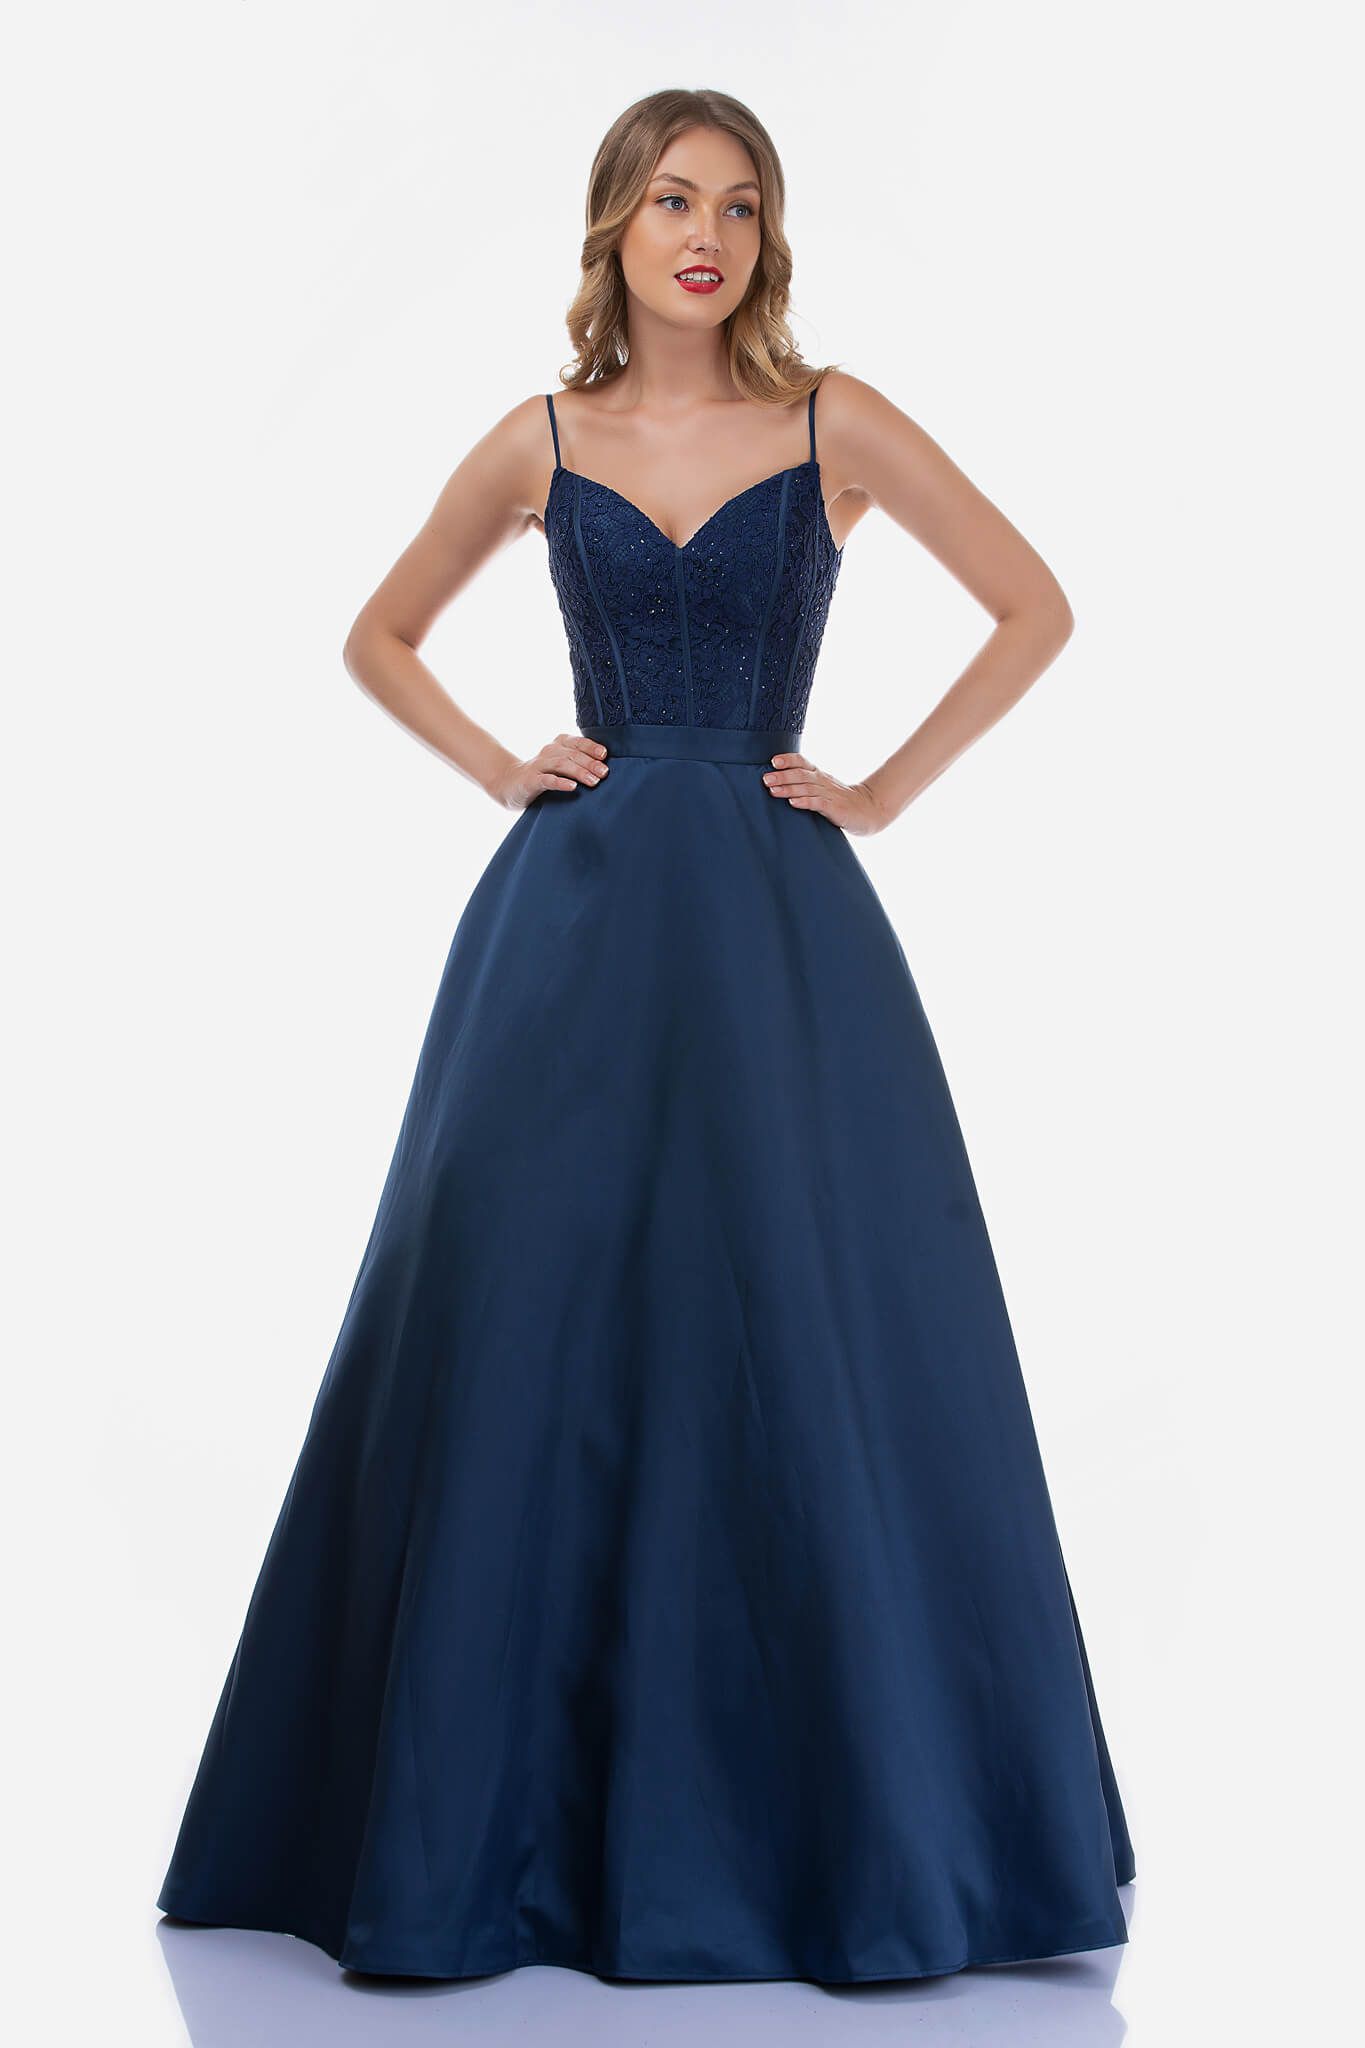 Style 2250 Nina Canacci Size 12 Prom Lace Navy Blue Ball Gown on Queenly